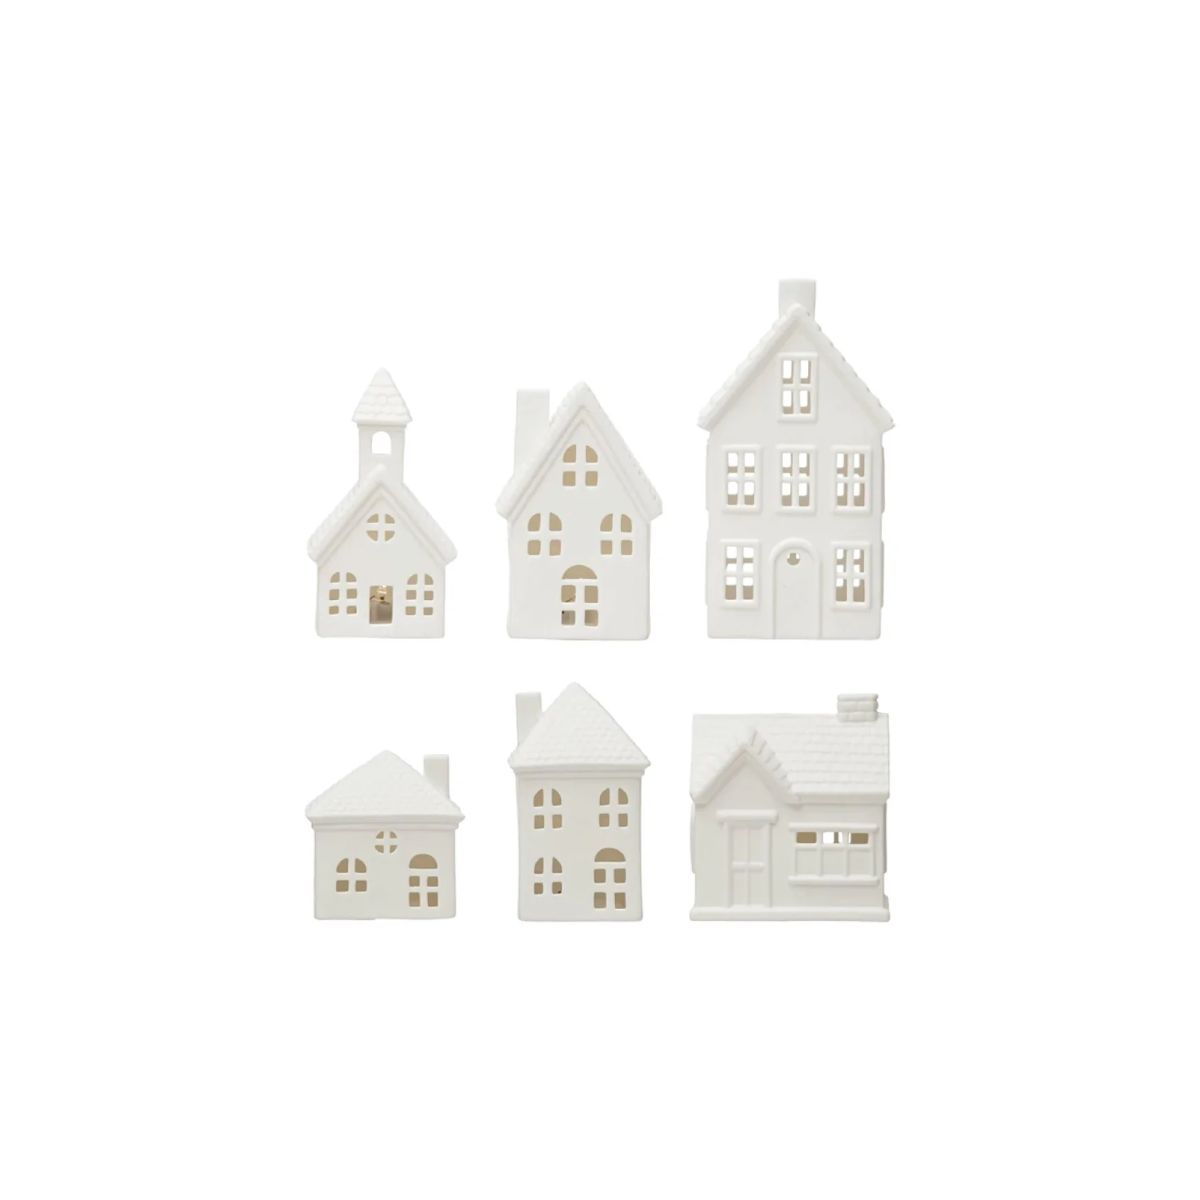 Small white ceramic holiday village Christmas decorations